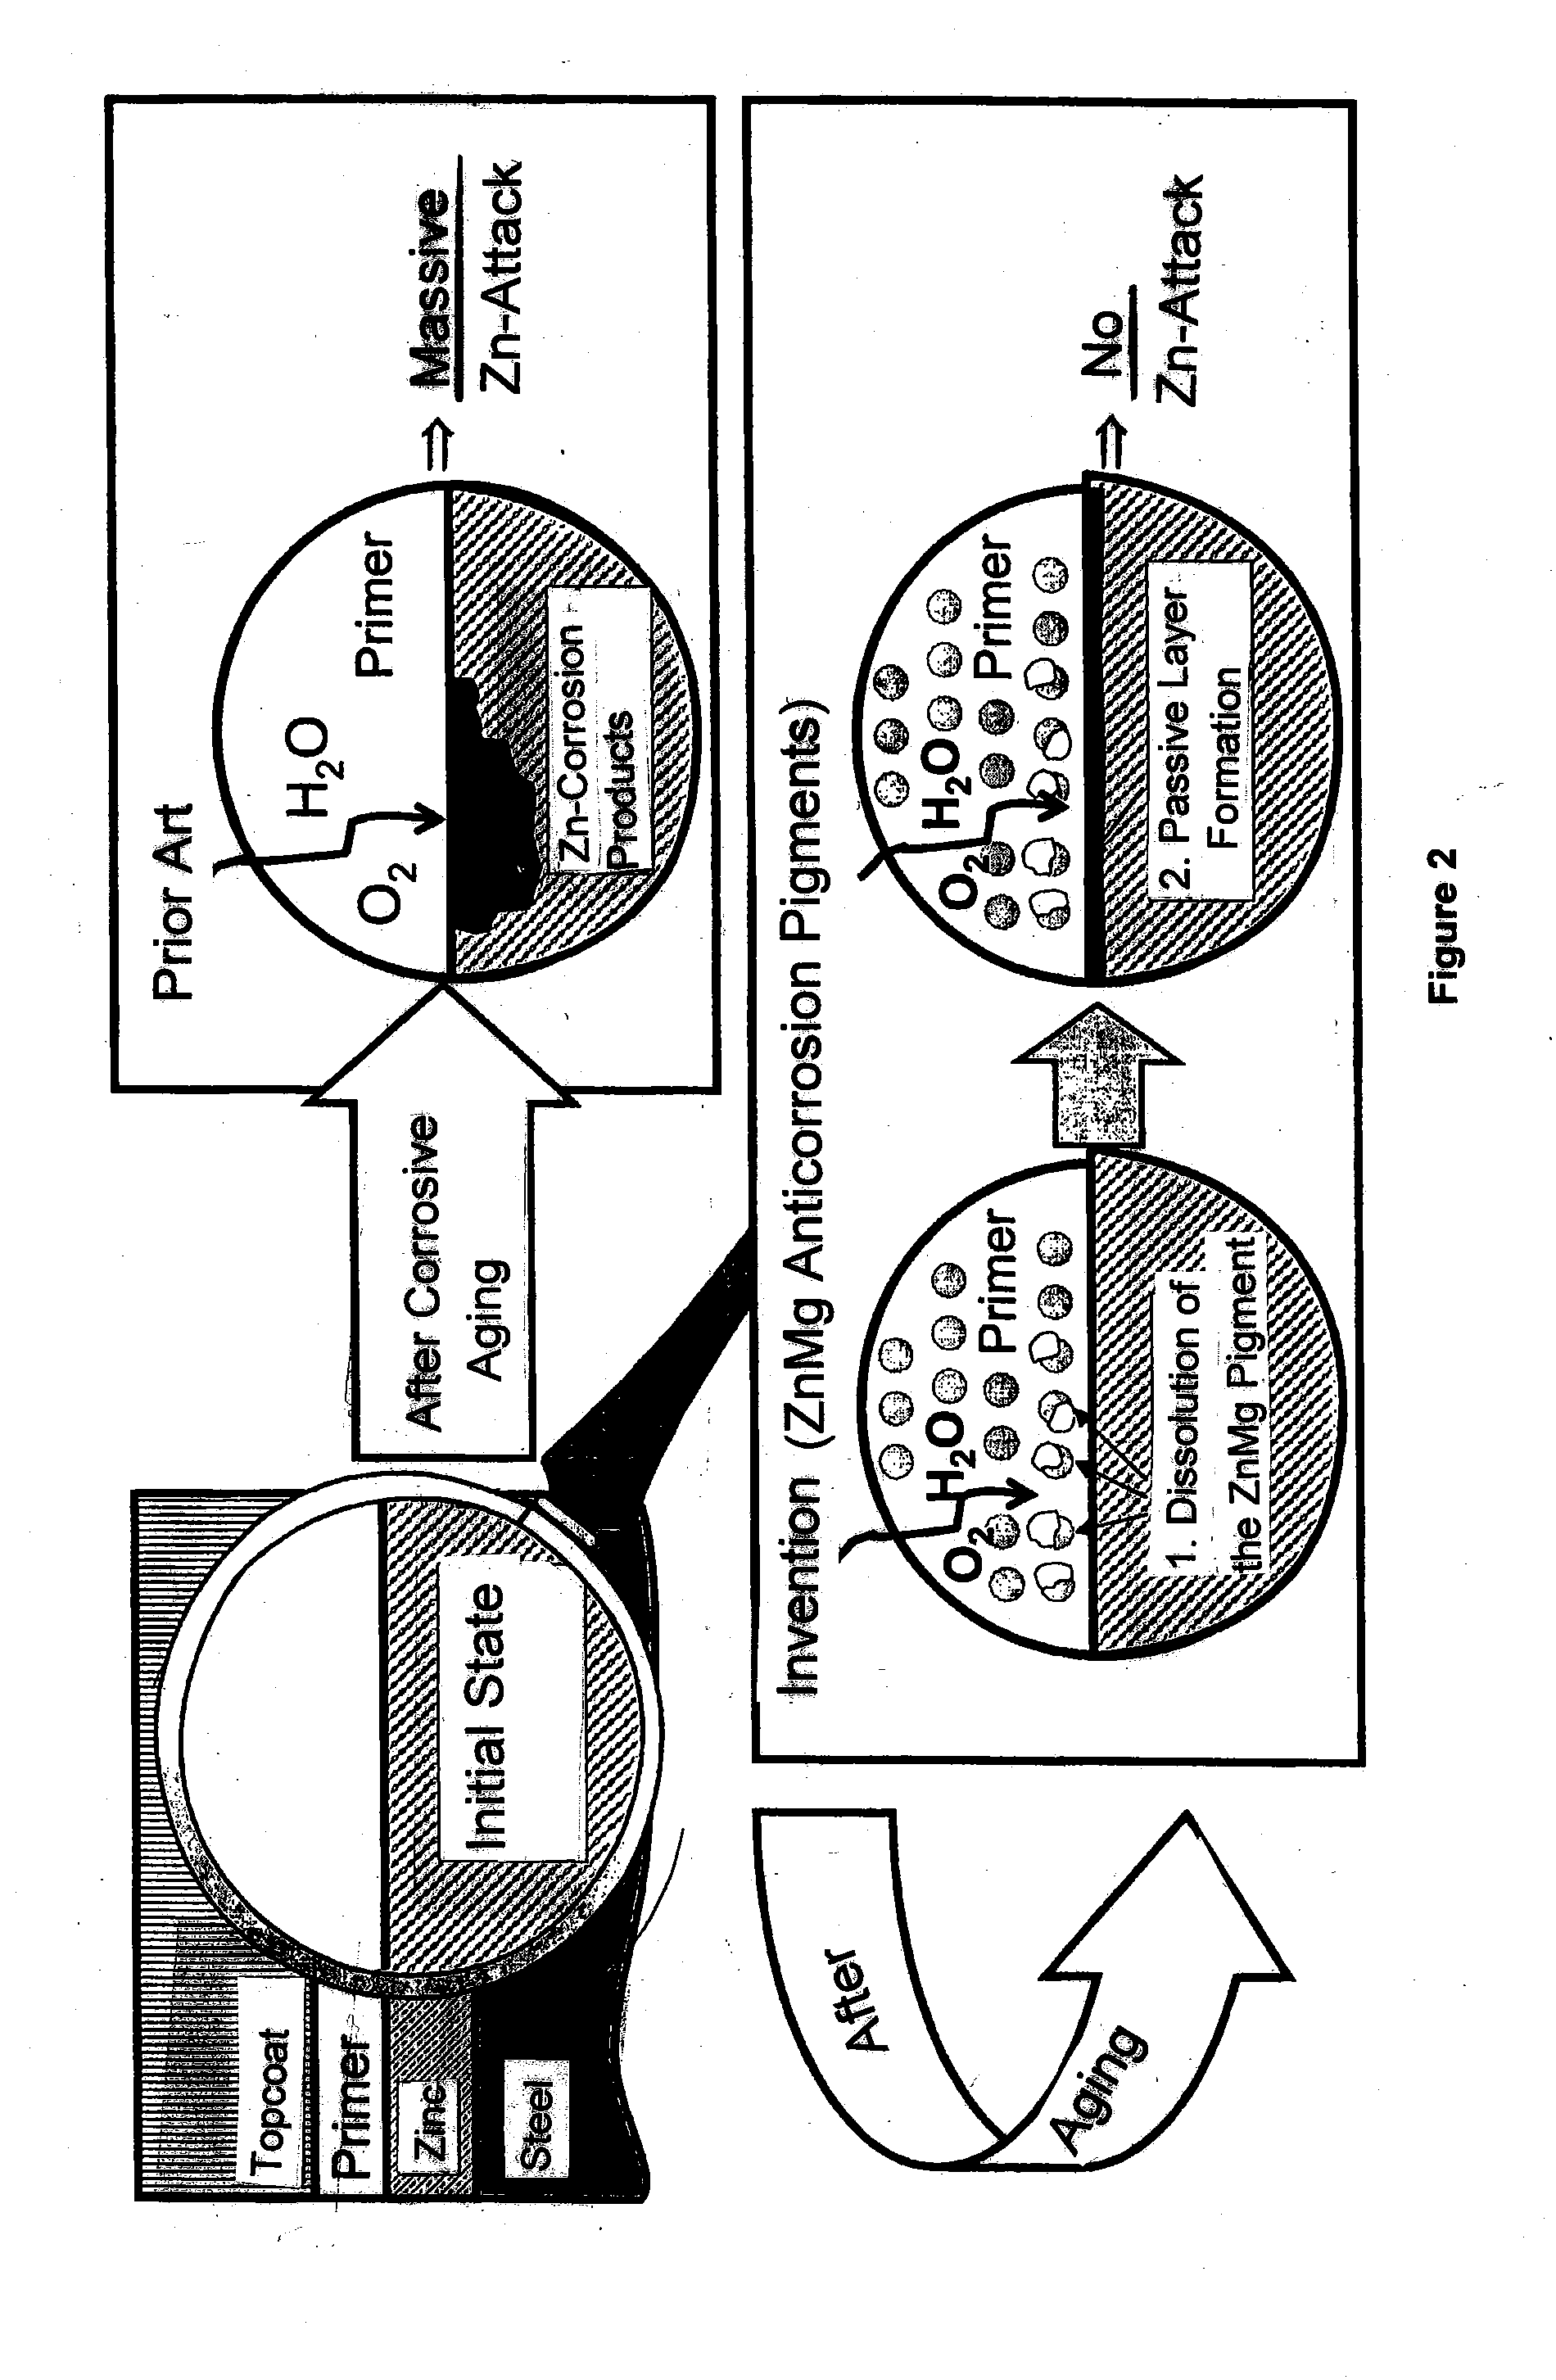 Anti-corrosion system for metals and pigment therefor